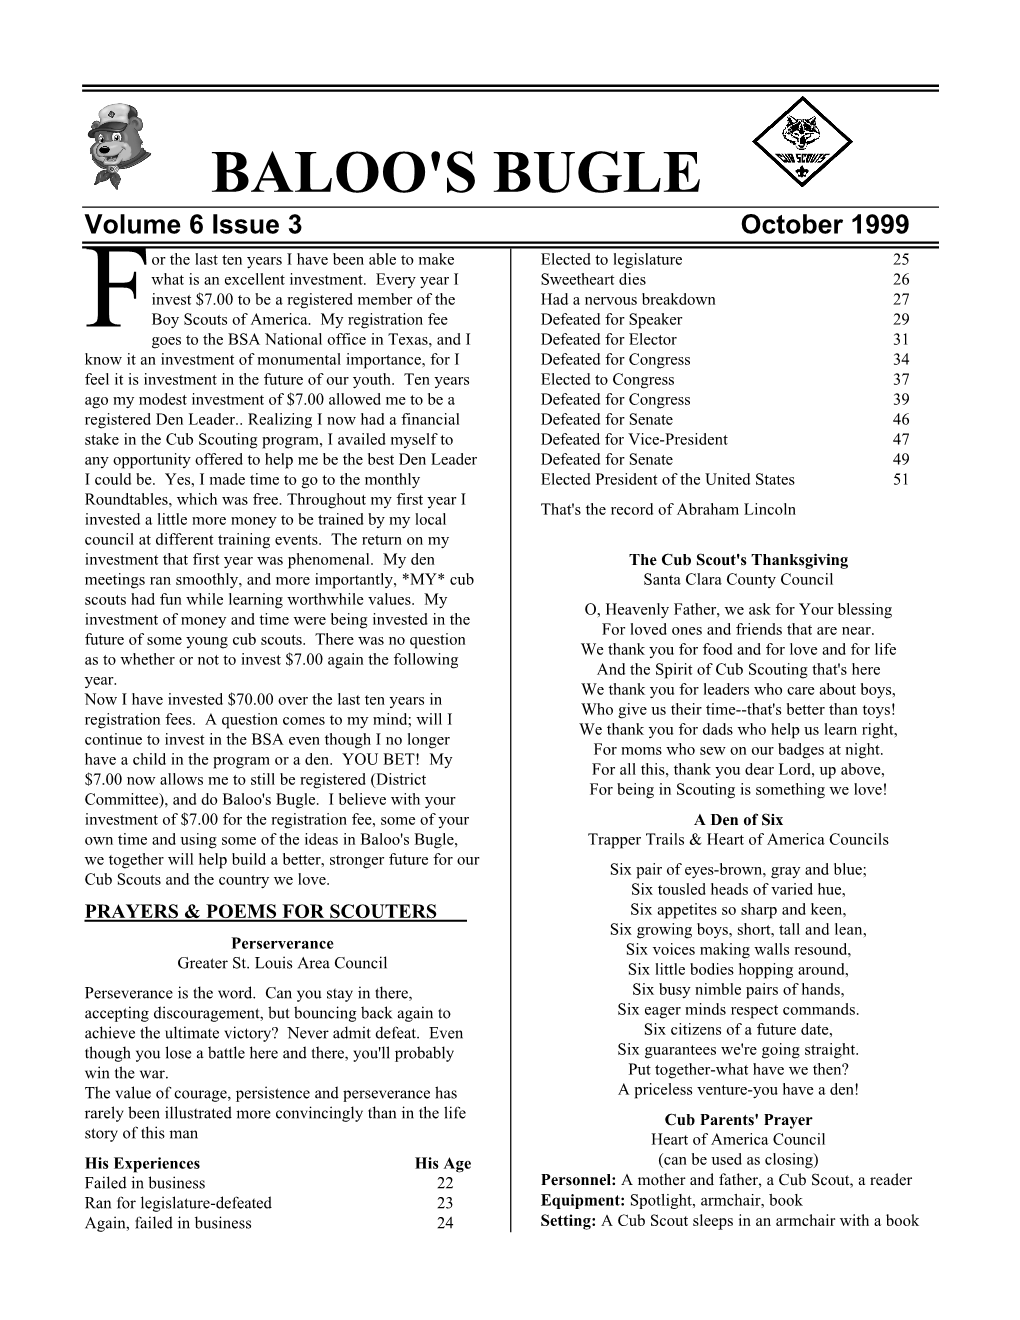 BALOO's BUGLE Volume 6 Issue 3 October 1999 Or the Last Ten Years I Have Been Able to Make Elected to Legislature 25 What Is an Excellent Investment